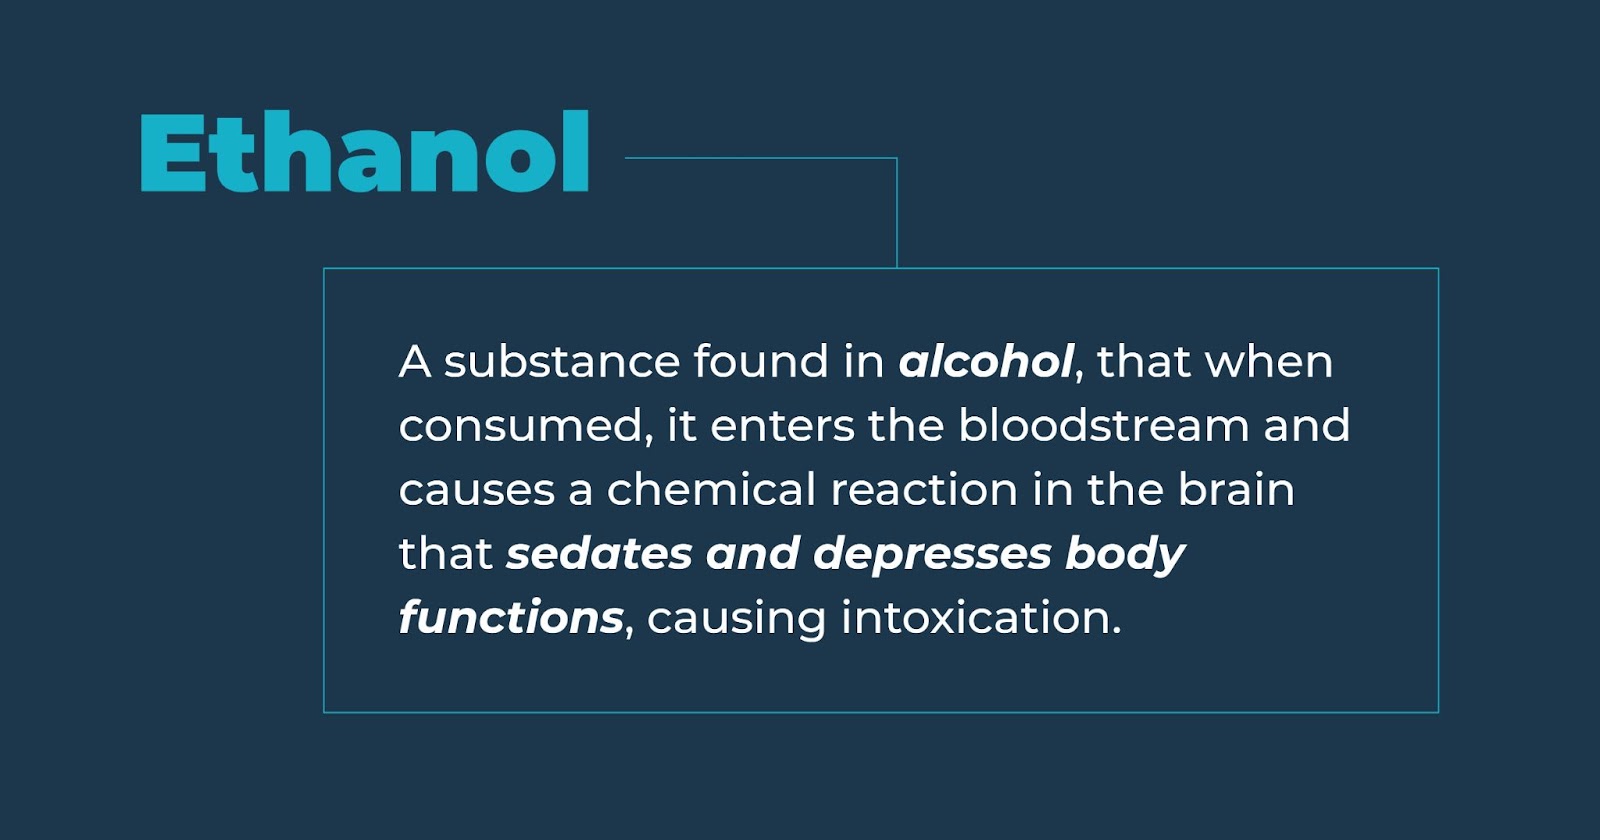 ethanol, a substance found in alcohol, that when consumed, it enters the bloodstream and causes a chemical reaction in the brain that sedates and depressed the body functions, causing intoxication.